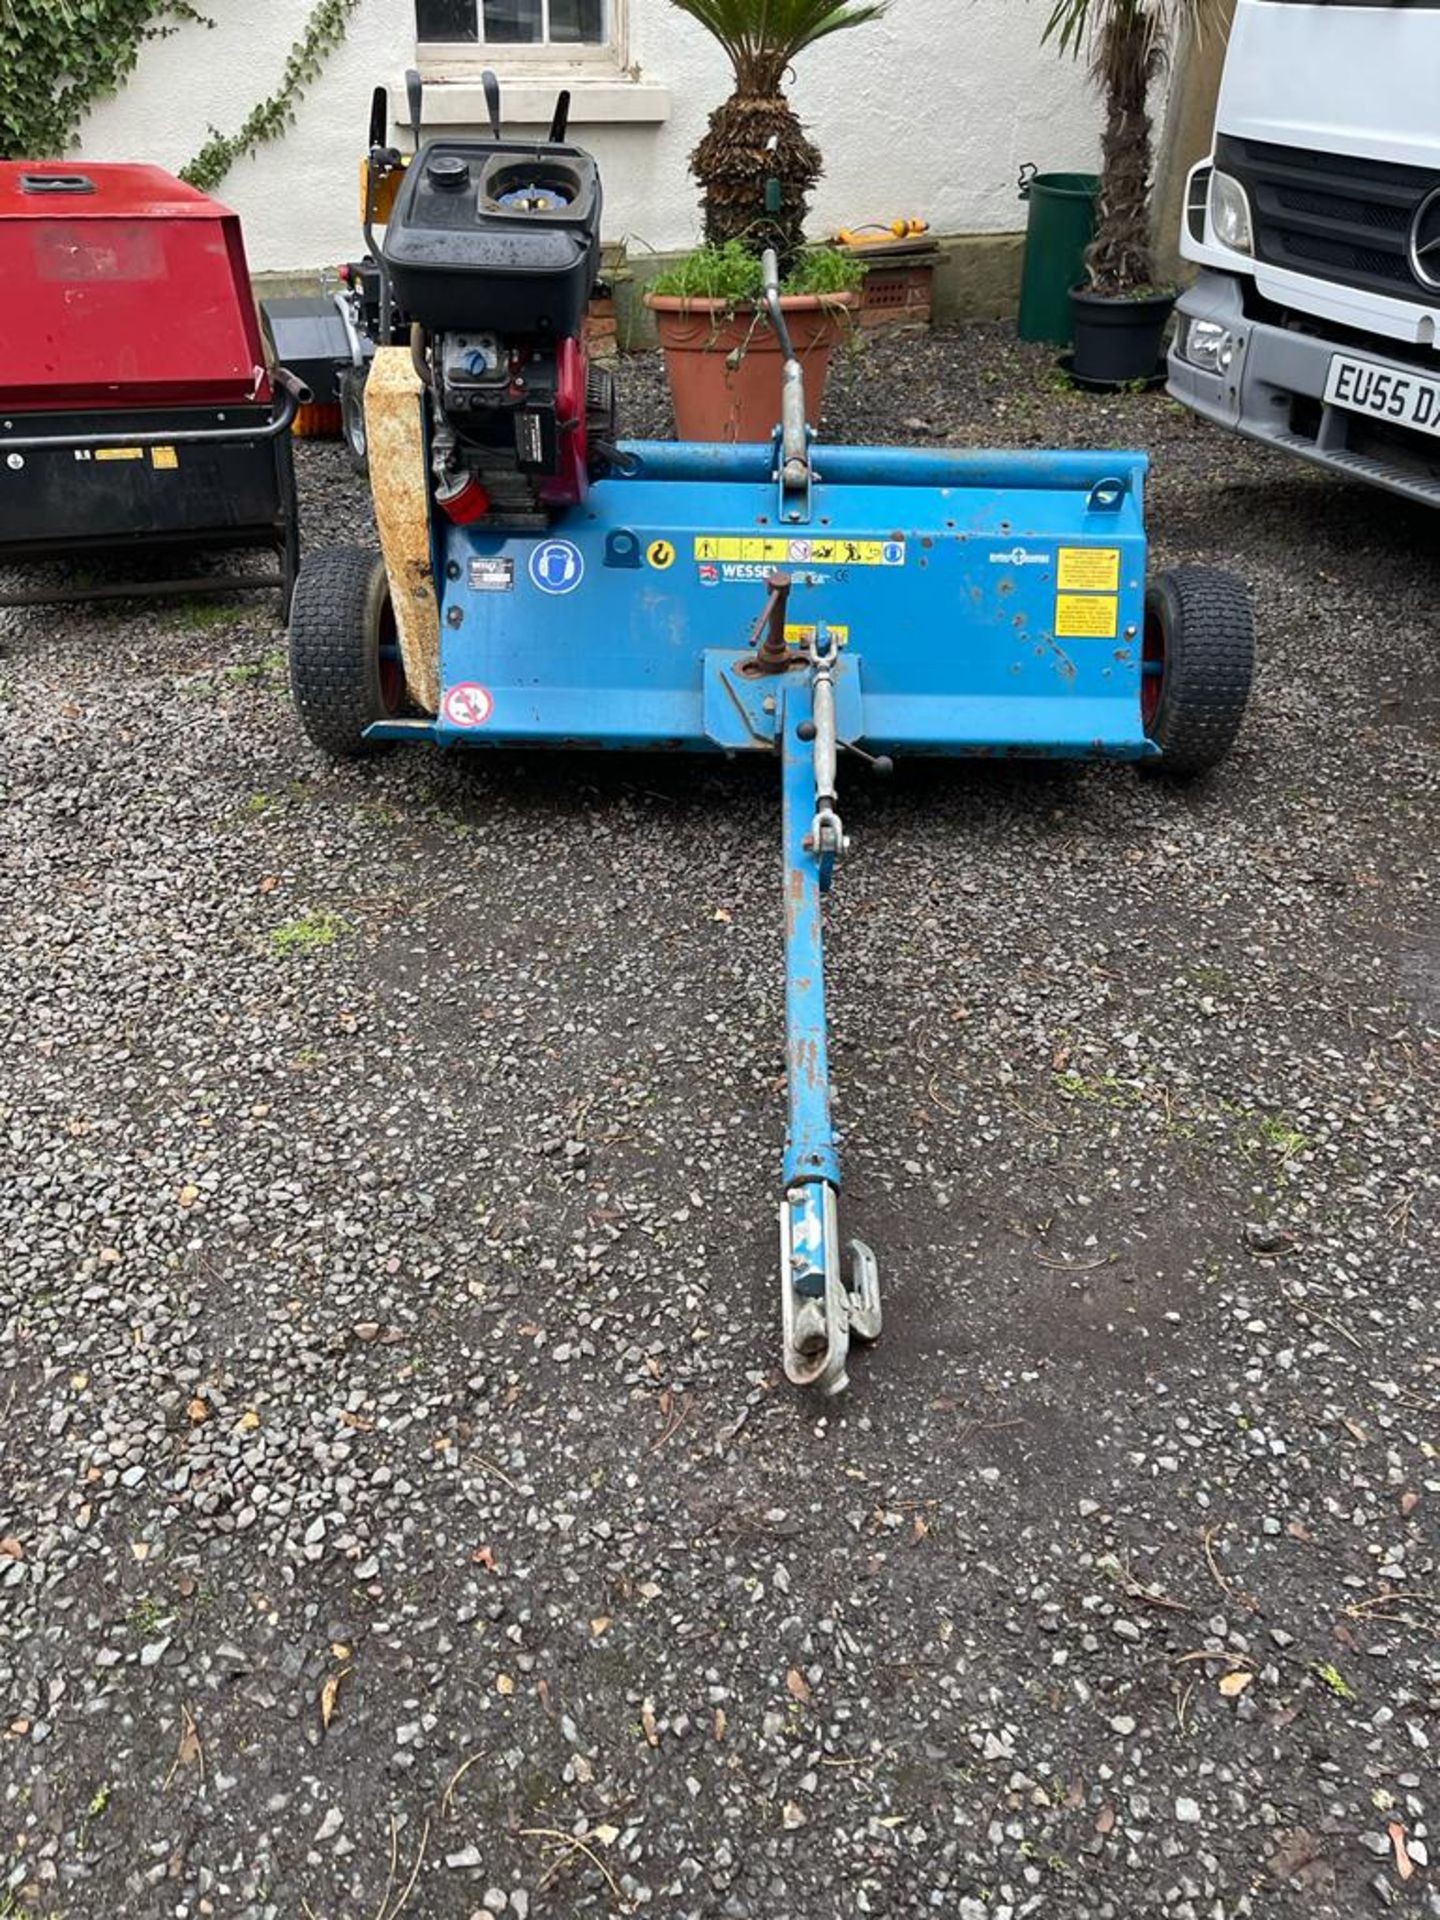 WESSEX FLAIL MOWER FOR QUADBIKE, ETC - 1200MM WIDE CUT *NO VAT* - Image 2 of 3